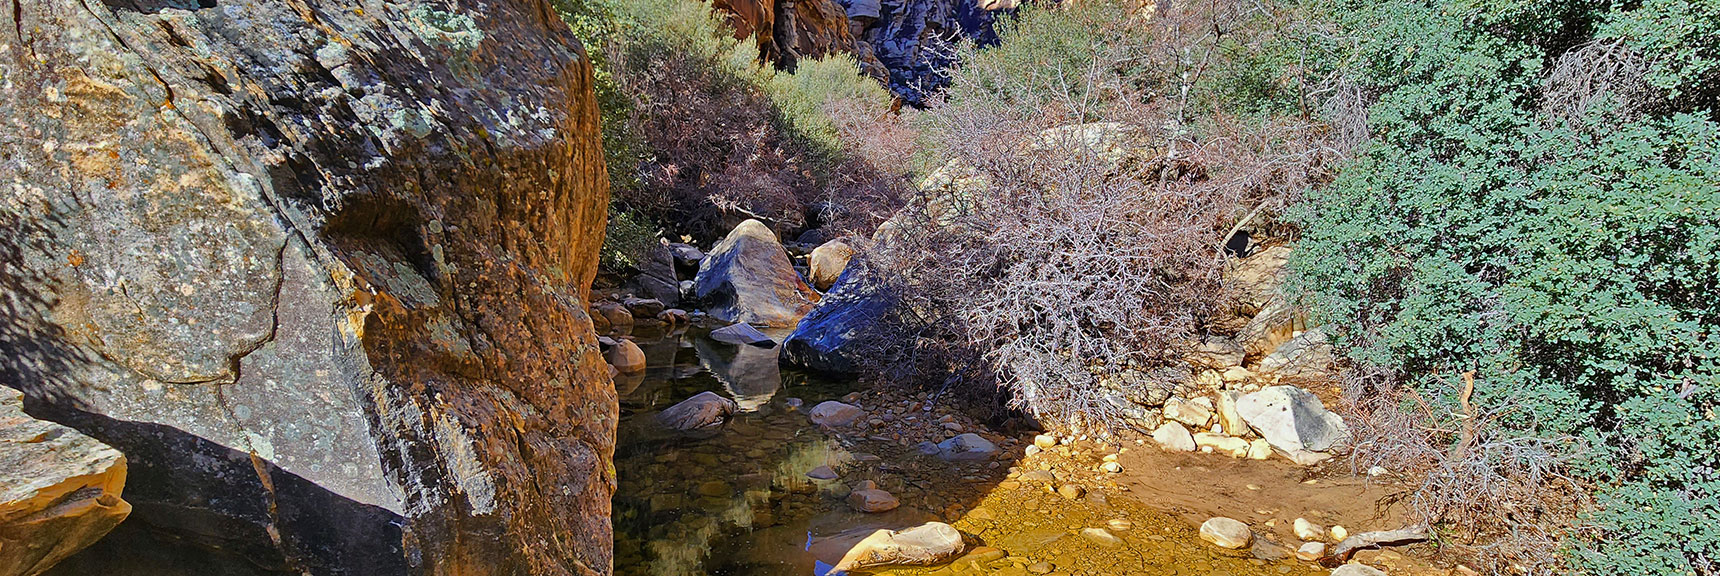 Another Creek Crossing. Watch for Passageway on Opposite Side | Ice Box Canyon | Red Rock Canyon NCA, Nevada | Las Vegas Area Trails | David Smith